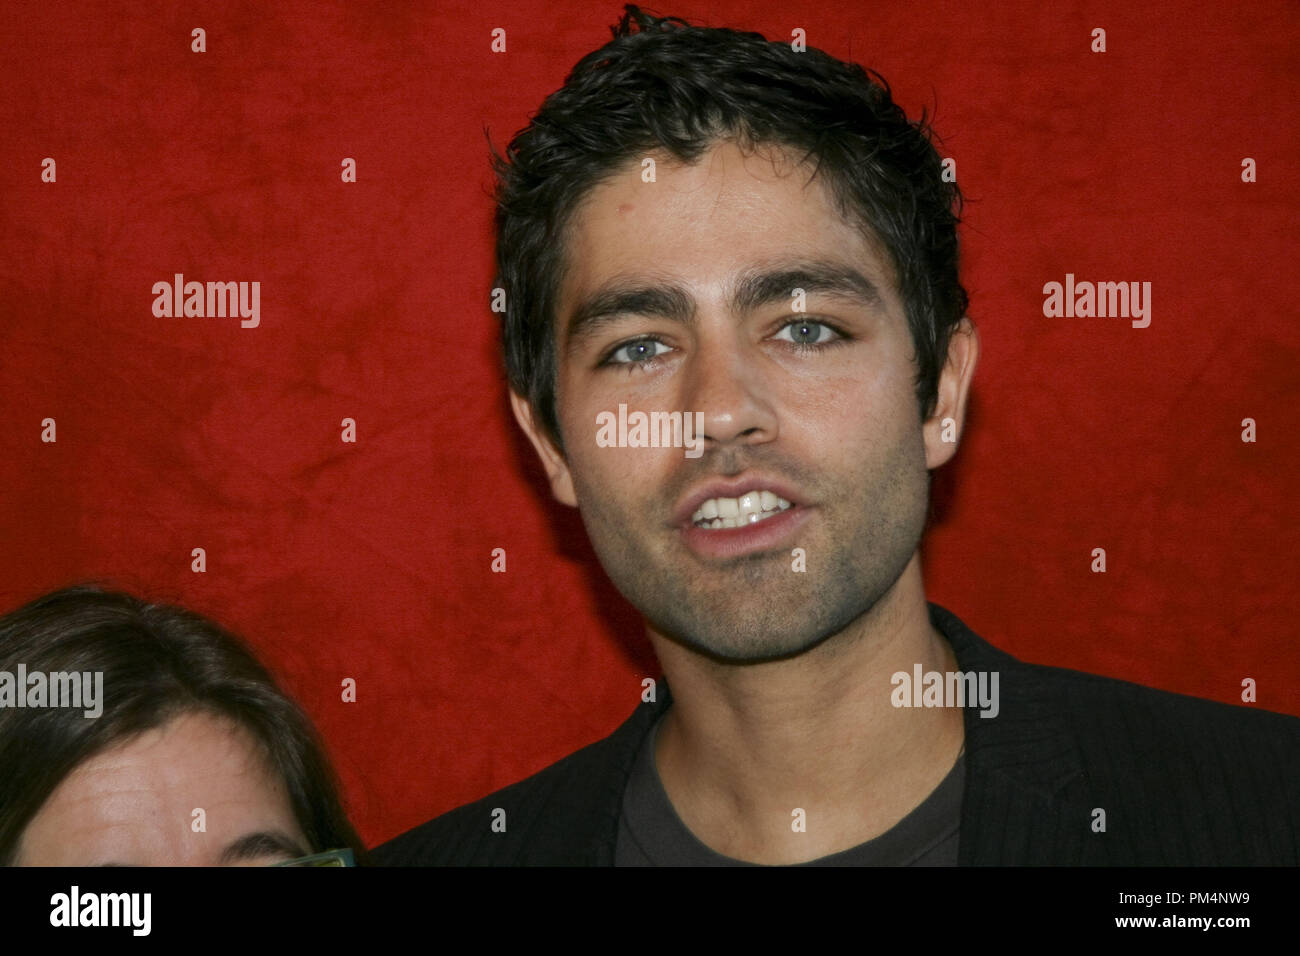 Adrian Grenier 'Teenage Paparazzo' Portrait Session, August 16, 2010.  Reproduction by American tabloids is absolutely forbidden. File Reference # 30445 013JRC  For Editorial Use Only -  All Rights Reserved Stock Photo